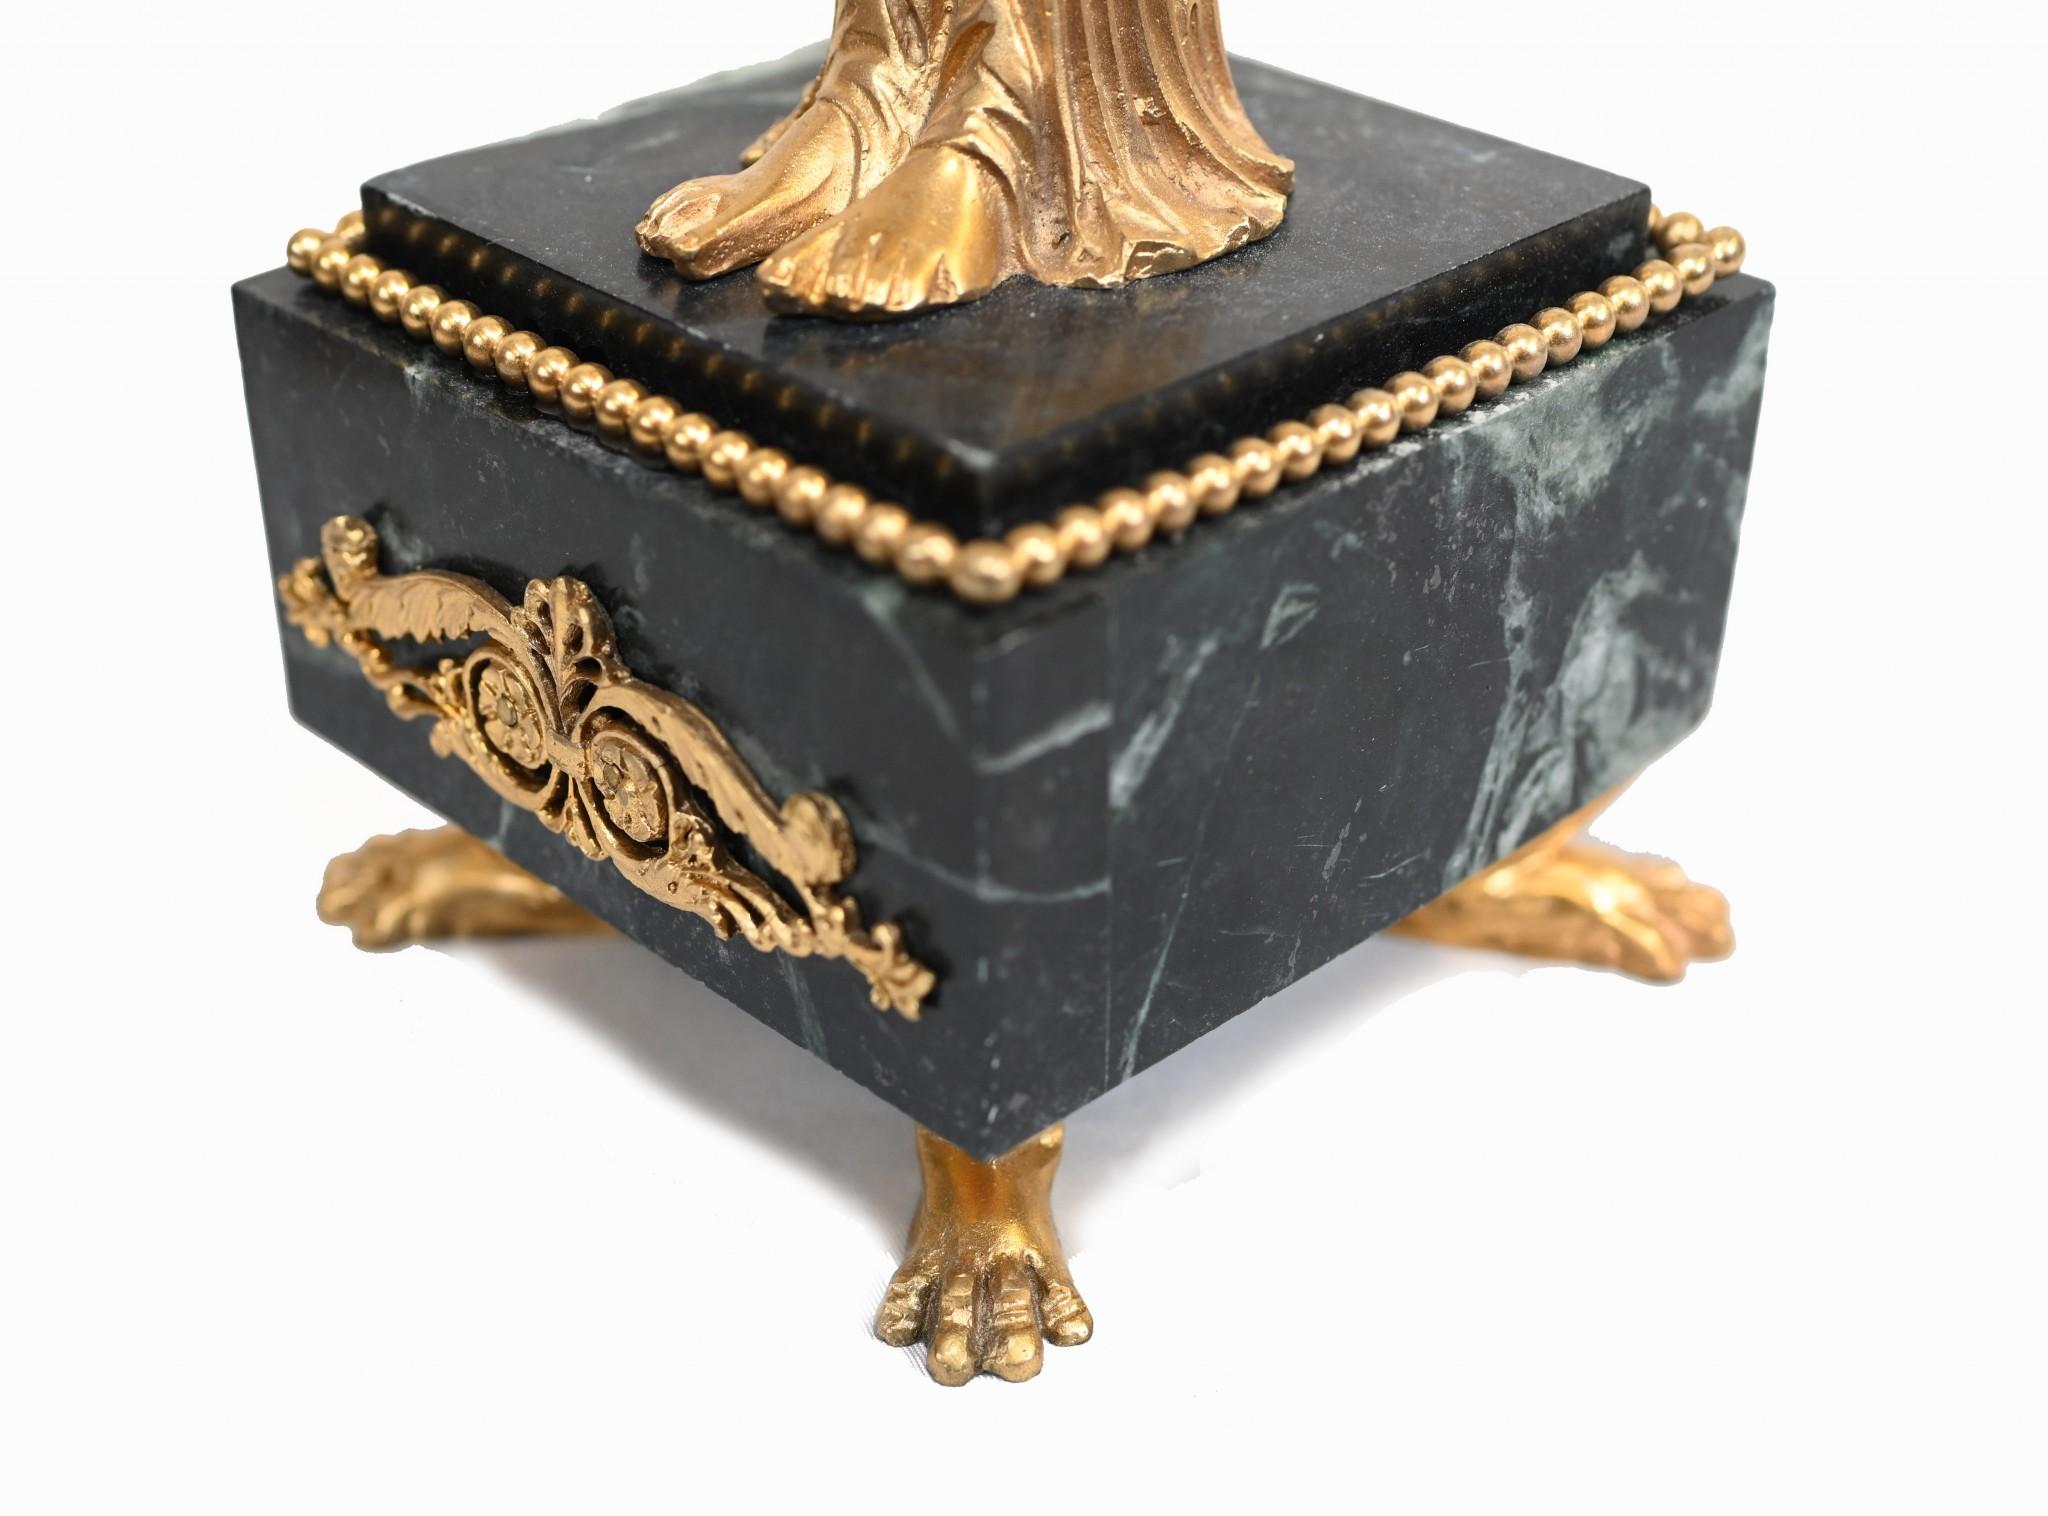 You are viewing an incredible pair of French Empire style ormolu candle sticks standing firmly on a square Italian marble base.
Ornate workmanship to these works of art is astounding.
The candle sticks themselves are three branched and would add